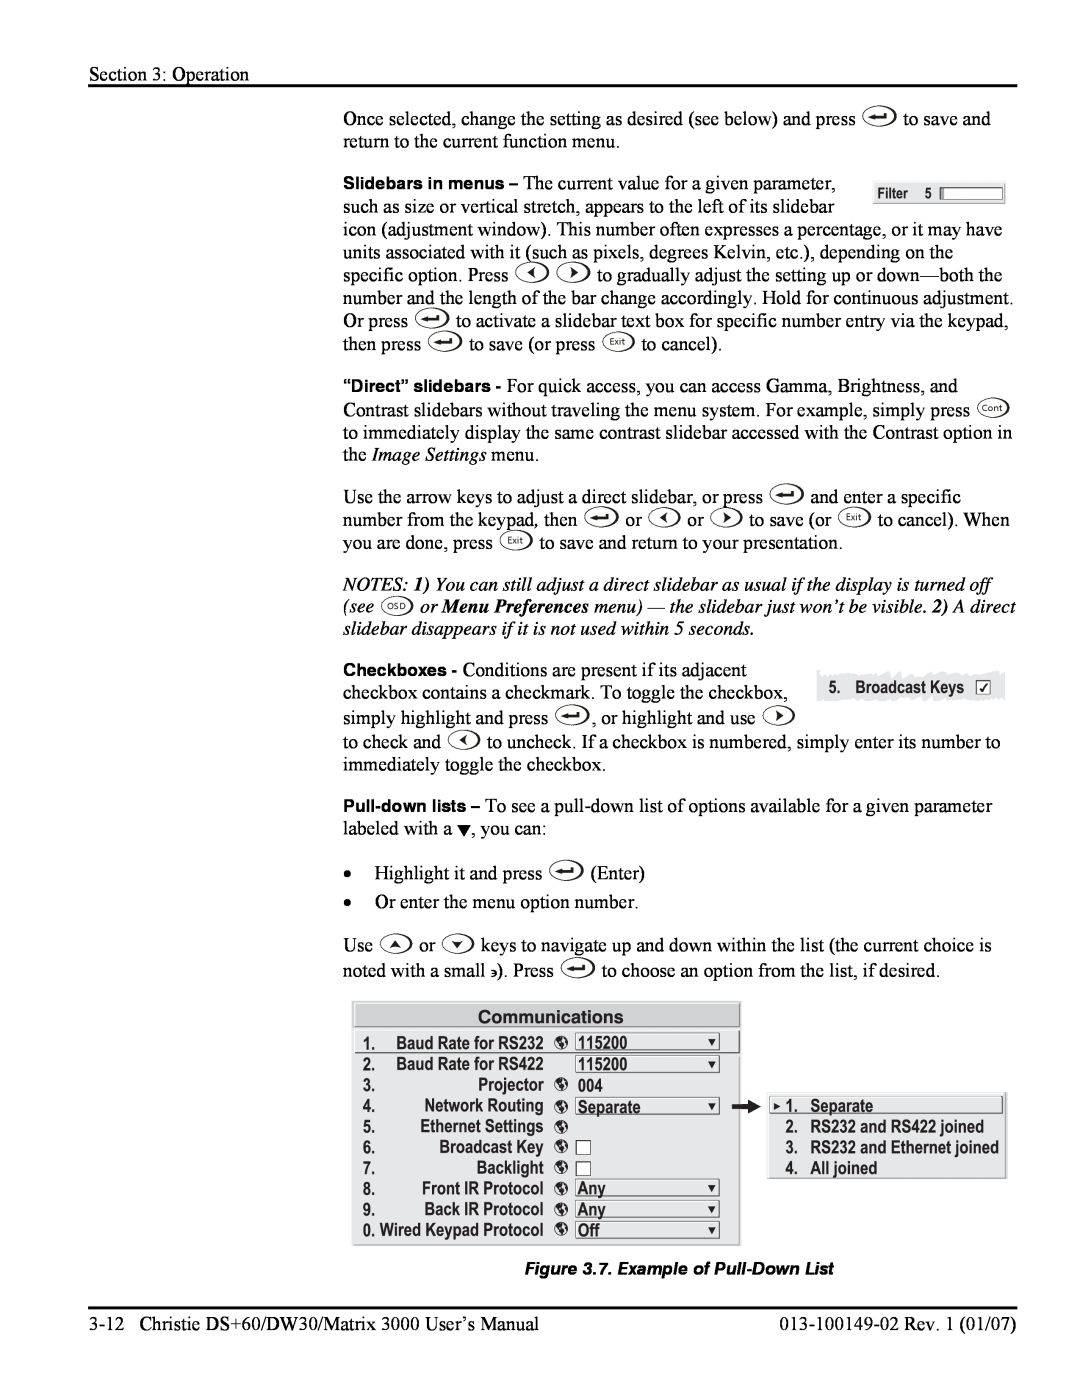 Texas Instruments DW30, MATRIX 3000 user manual 7. Example of Pull-Down List 